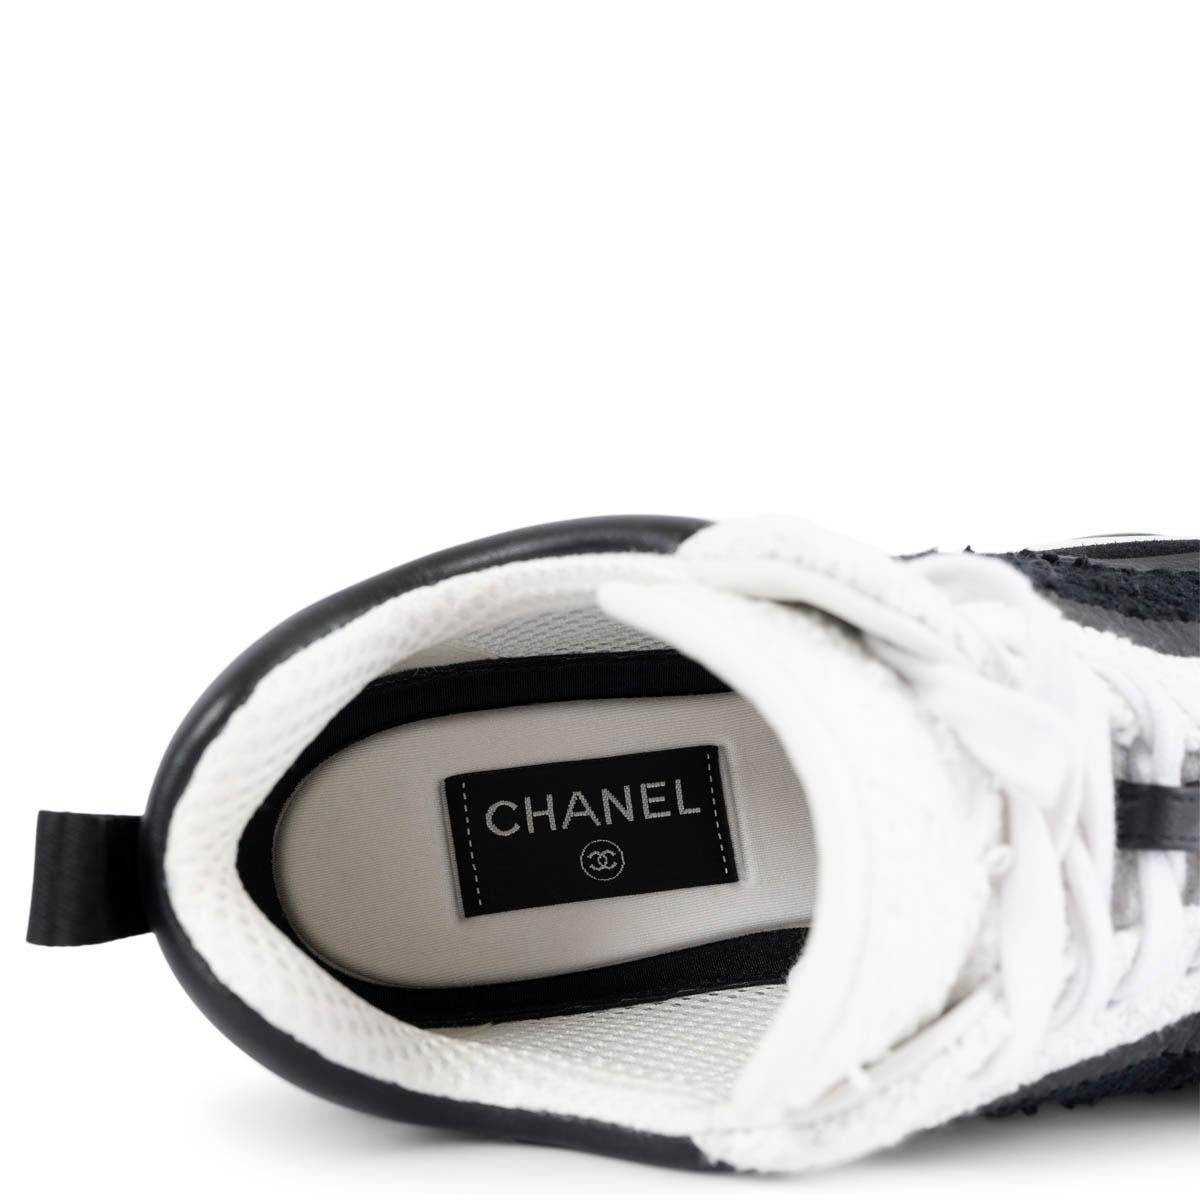 CHANEL black & white 2021 21S BOUCLE TRAINER Sneakers Shoes 38.5 2